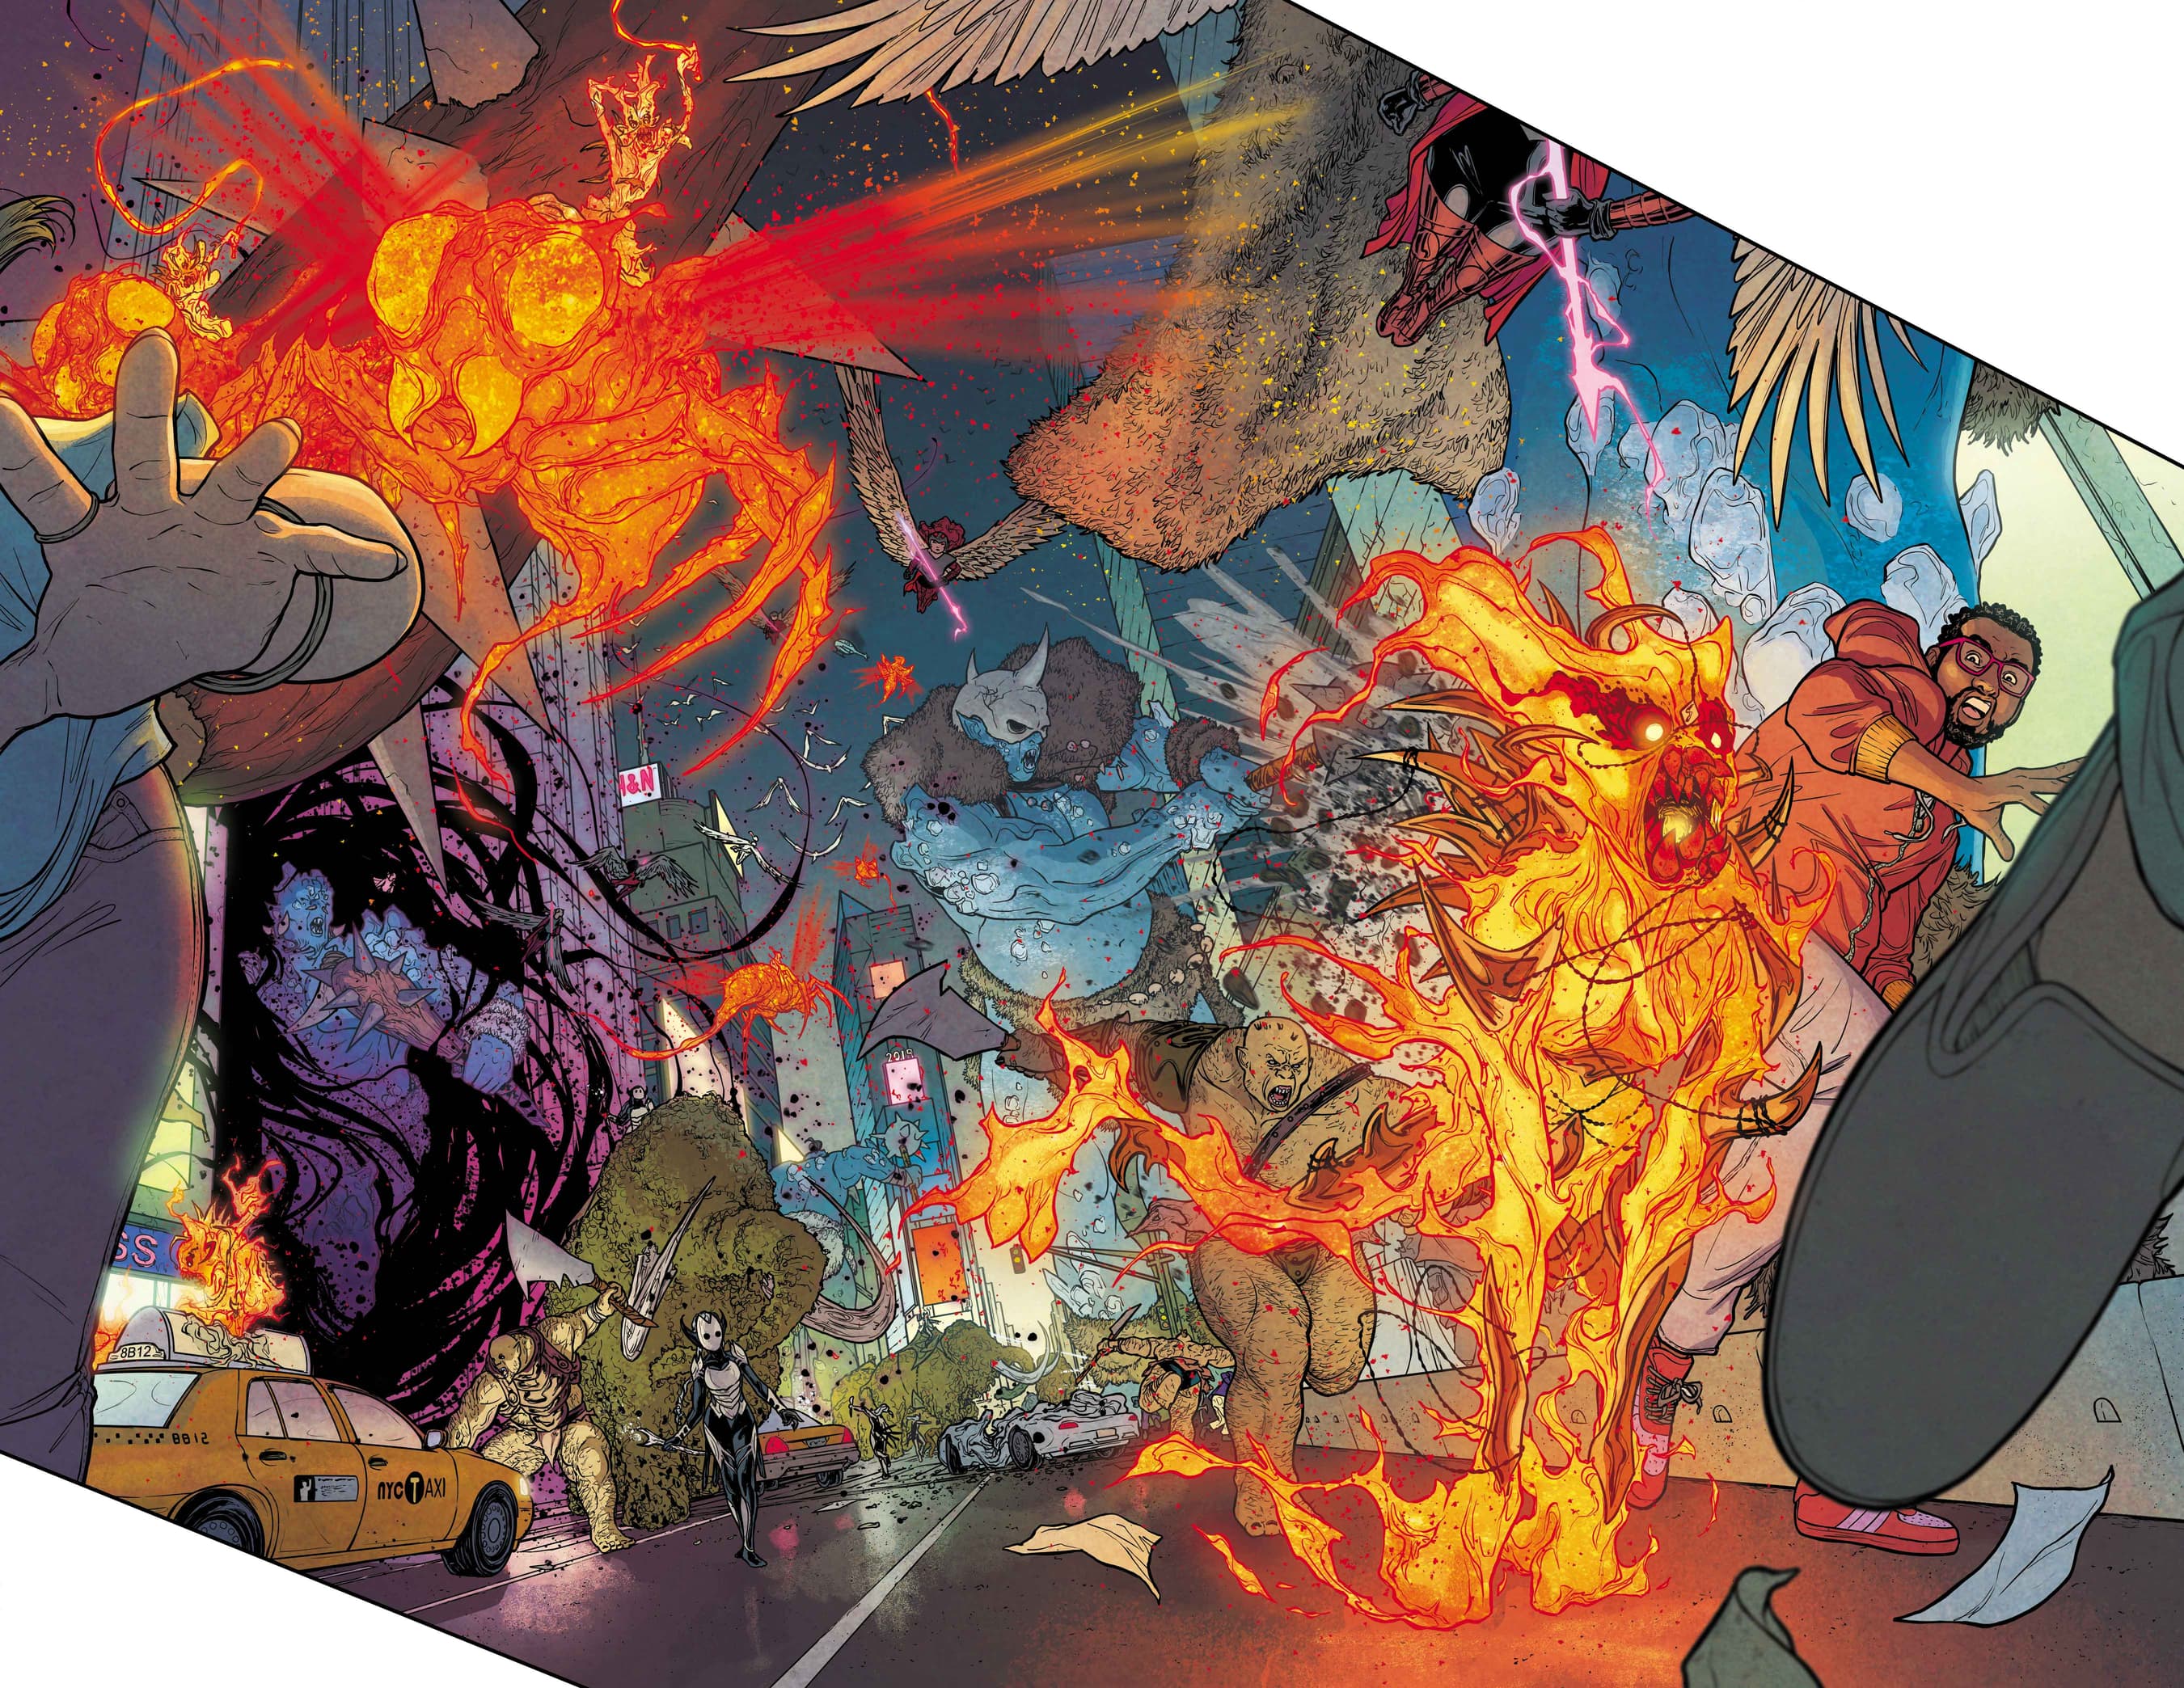 WAR OF THE REALMS #1